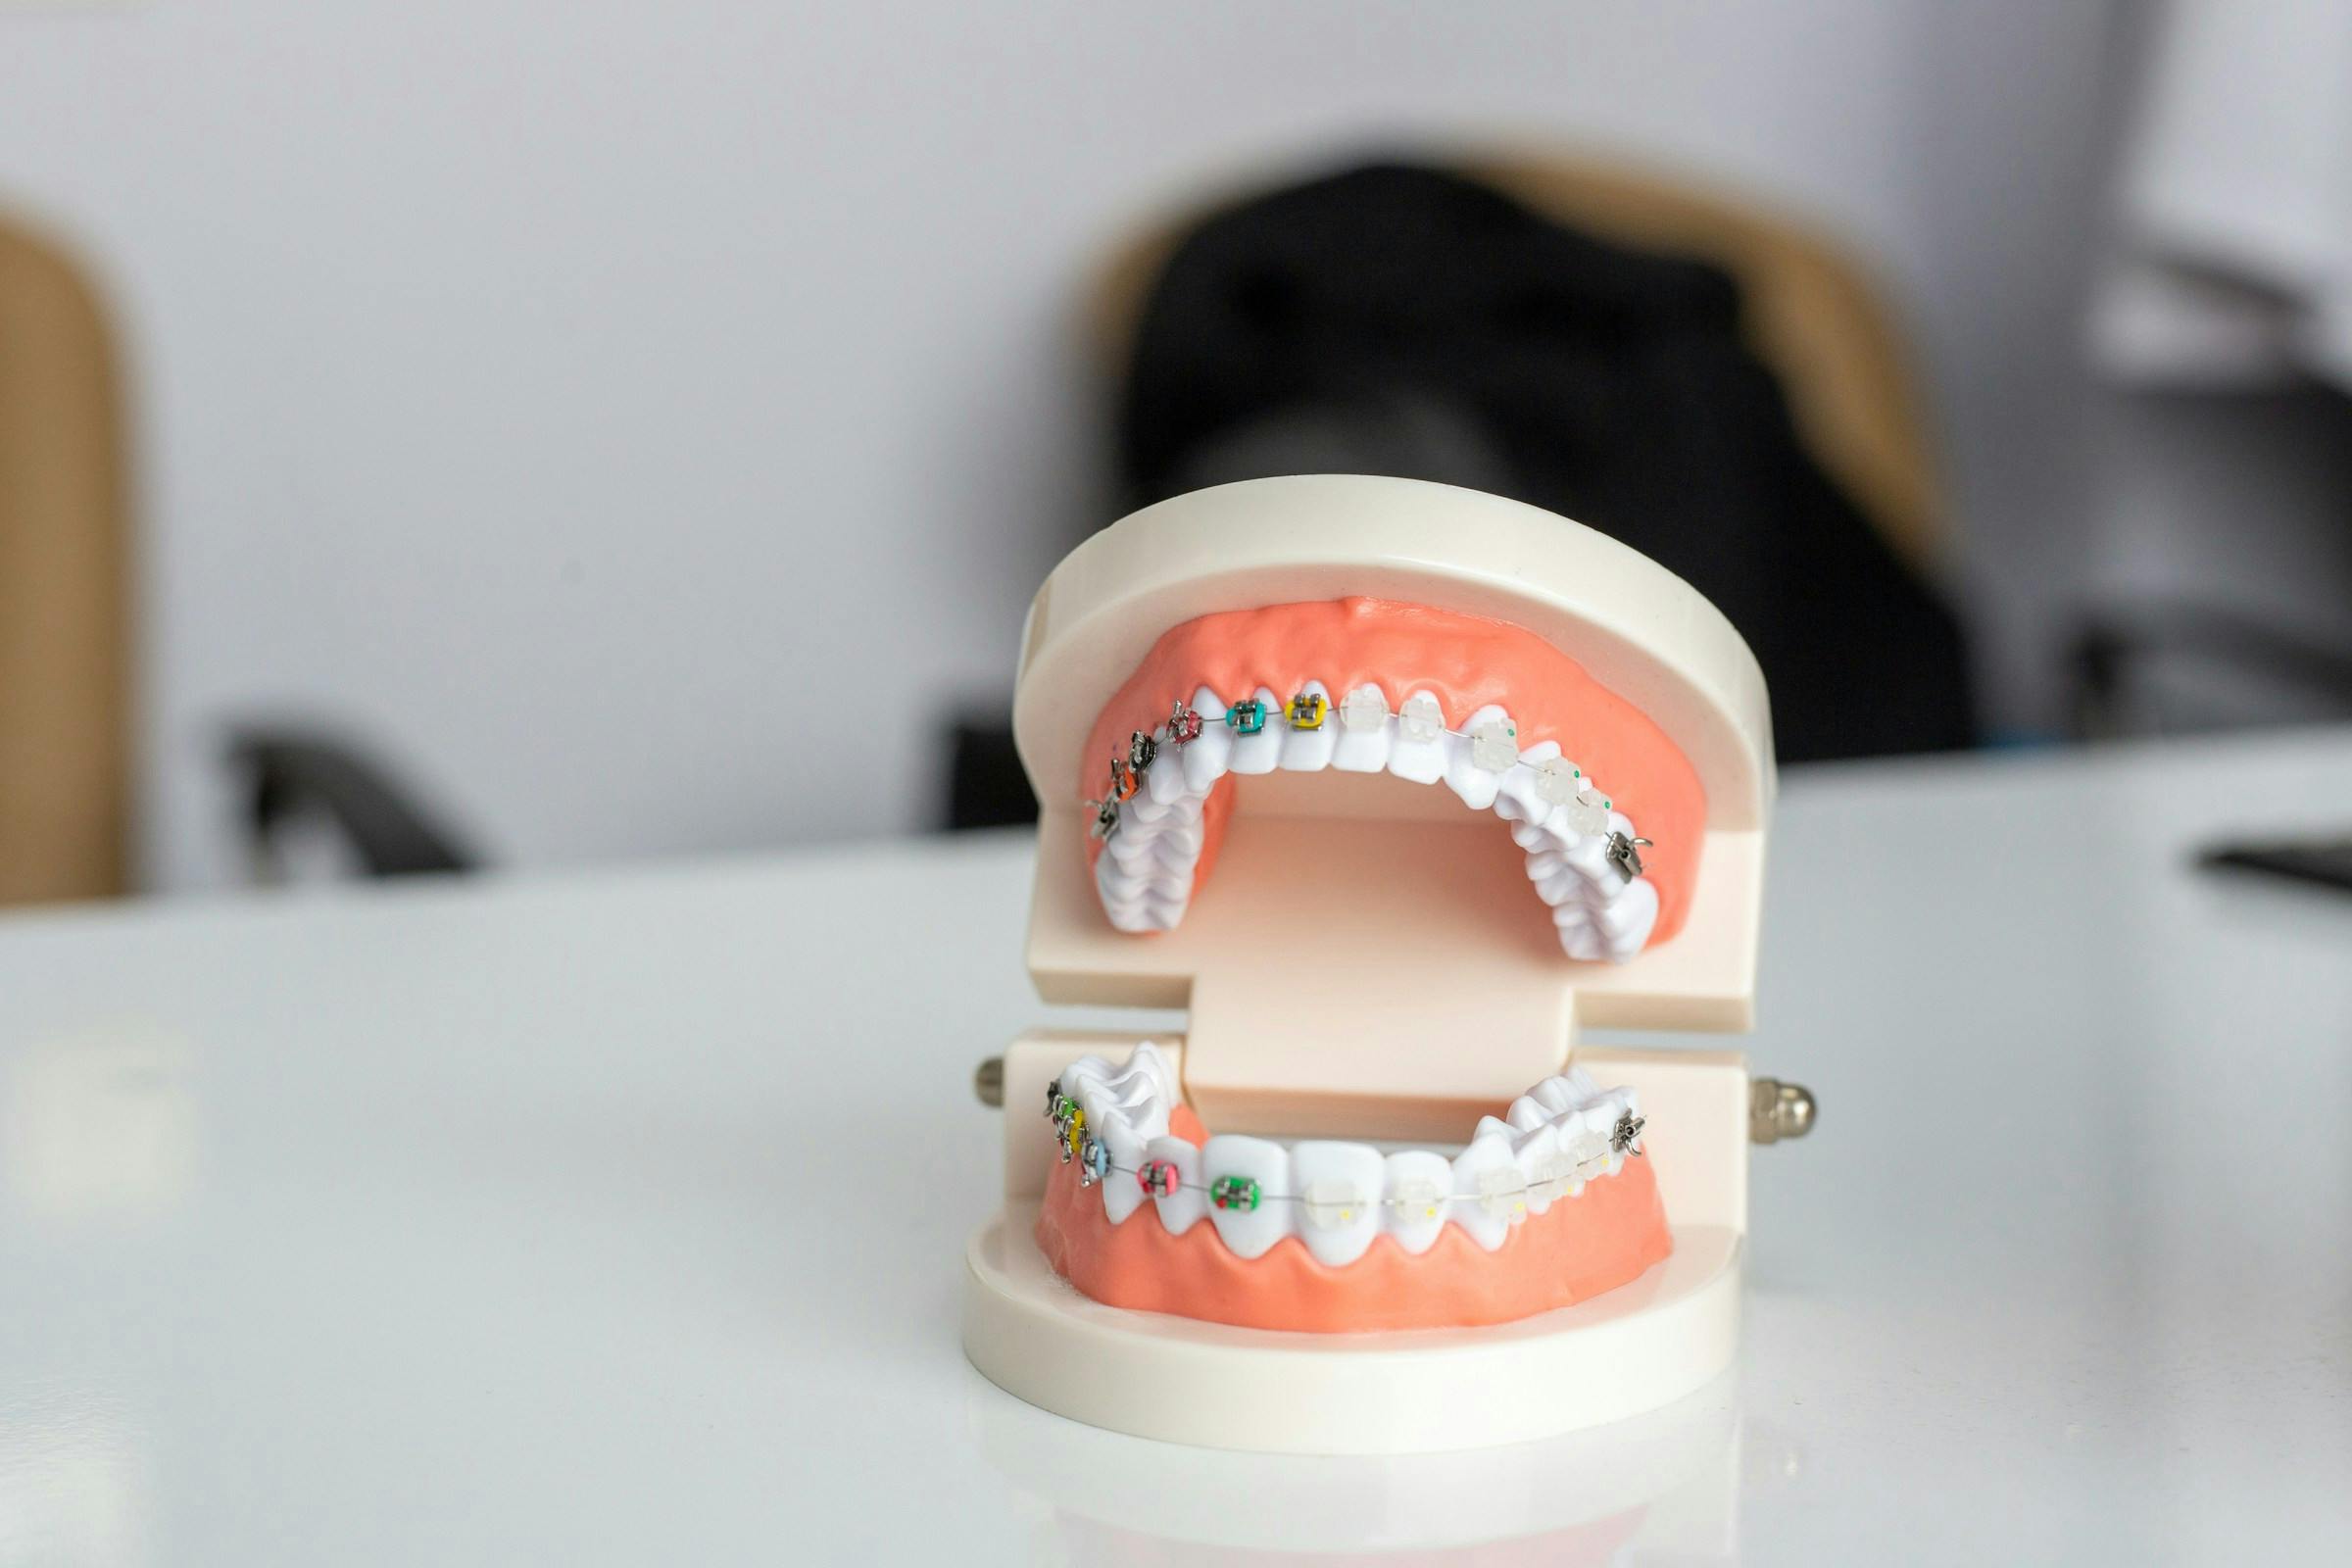 A dental model showcasing different types of braces and orthodontic issues on a desk